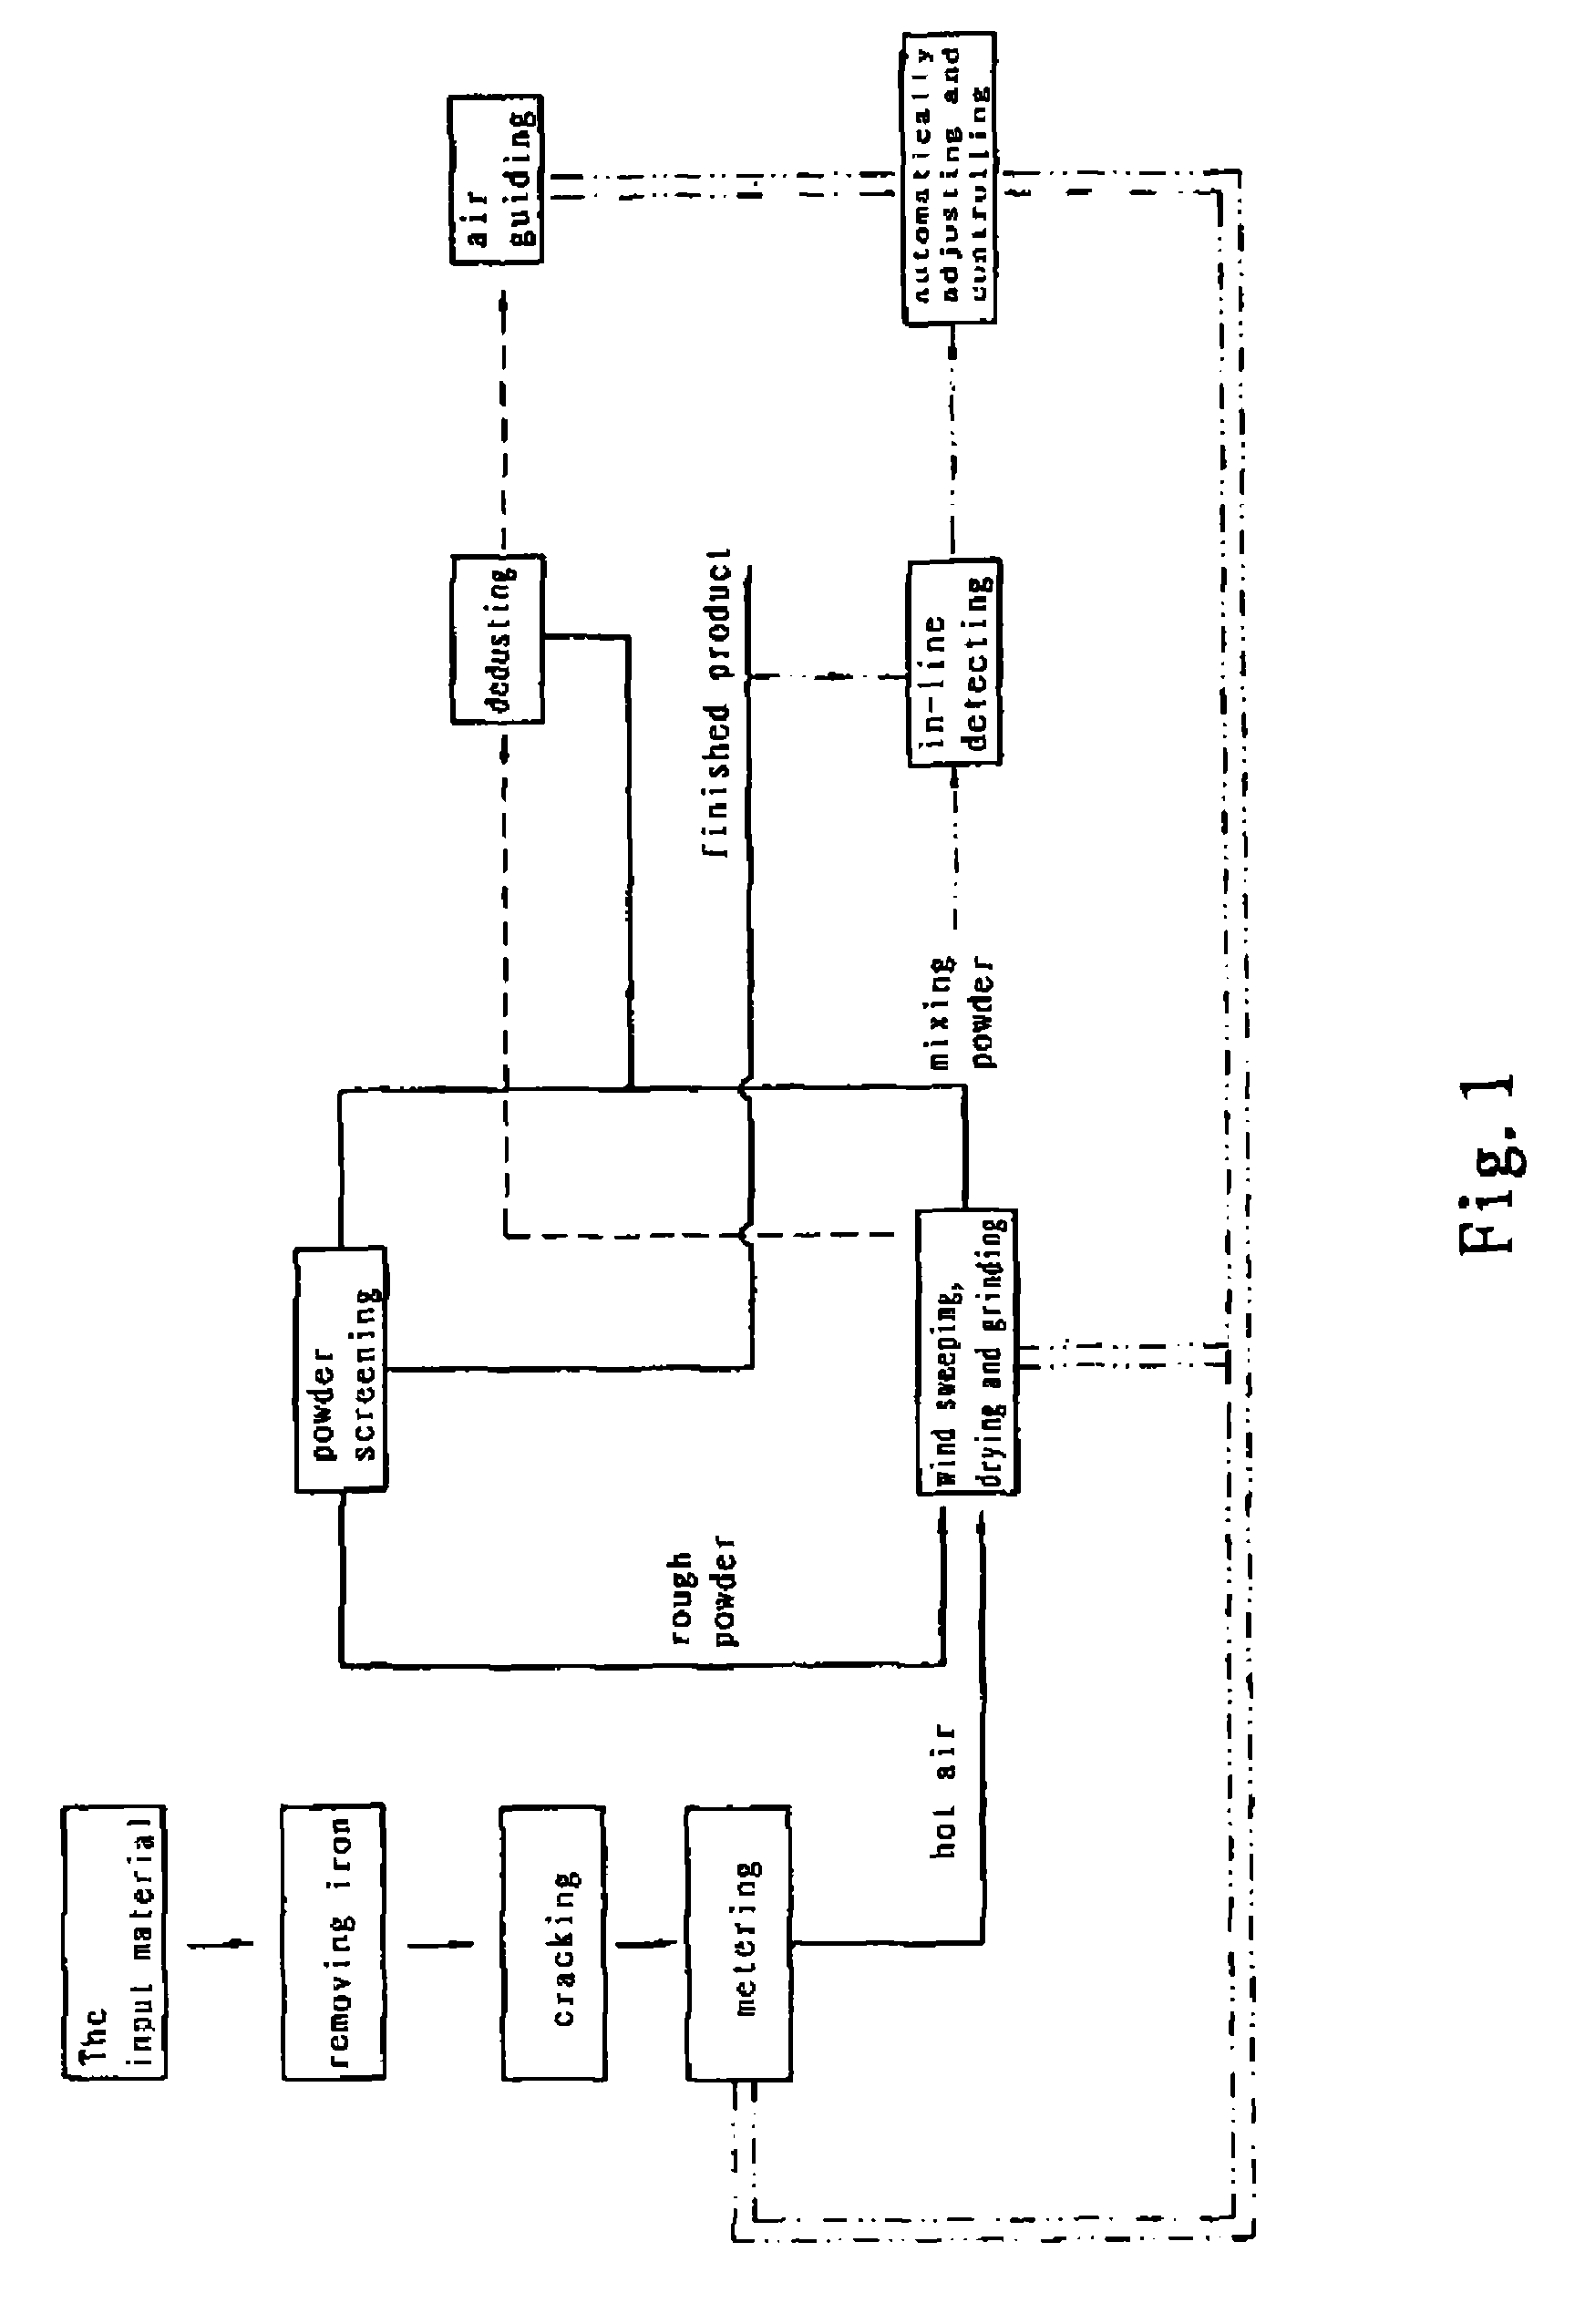 Control method for superfine powder grinding industrial waste slag in an energy-saving and environmental-friendly type of closed cycle with high yield and the apparatus for the same